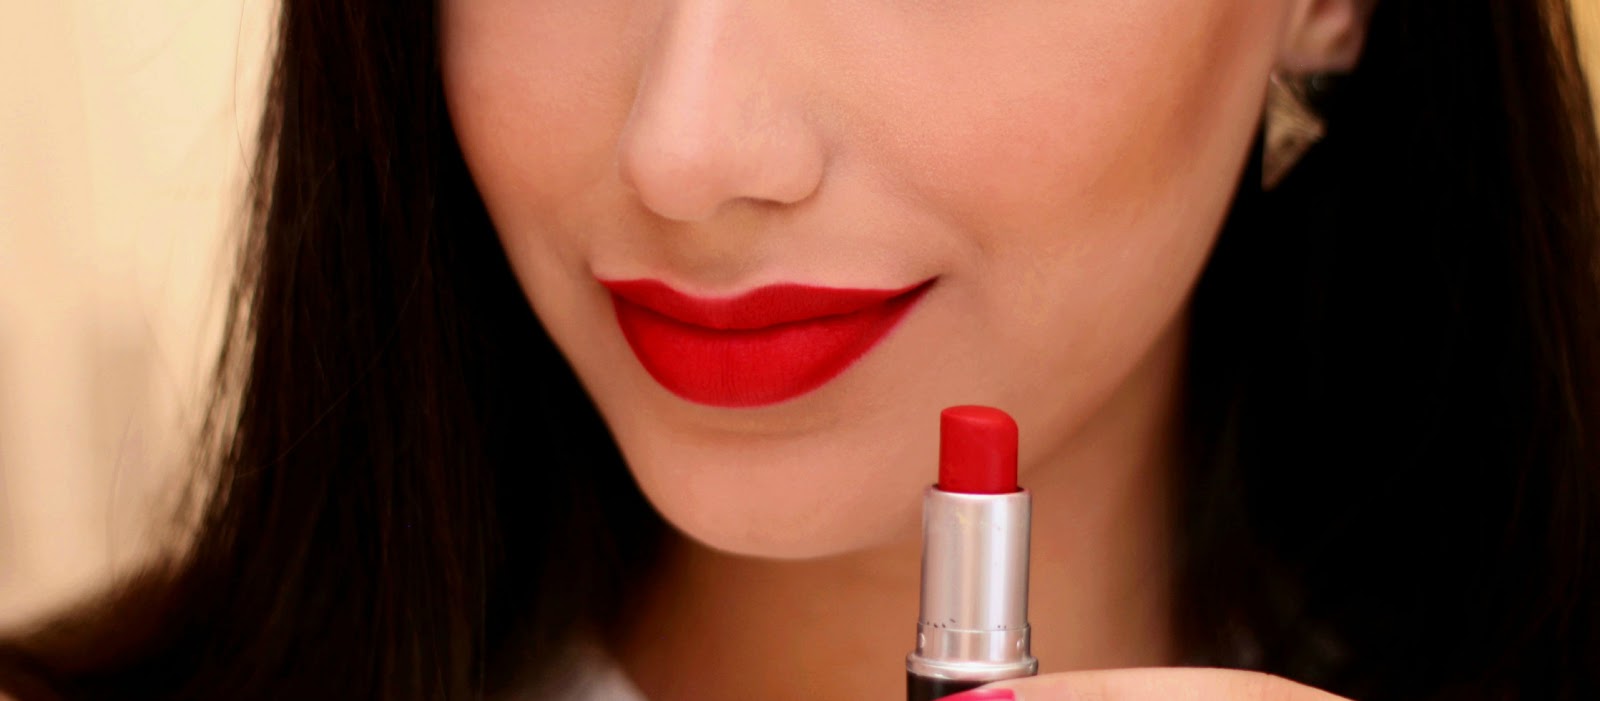 [Review] Bright Red Lipstick: MAC | Milani | Wet n Wild ...